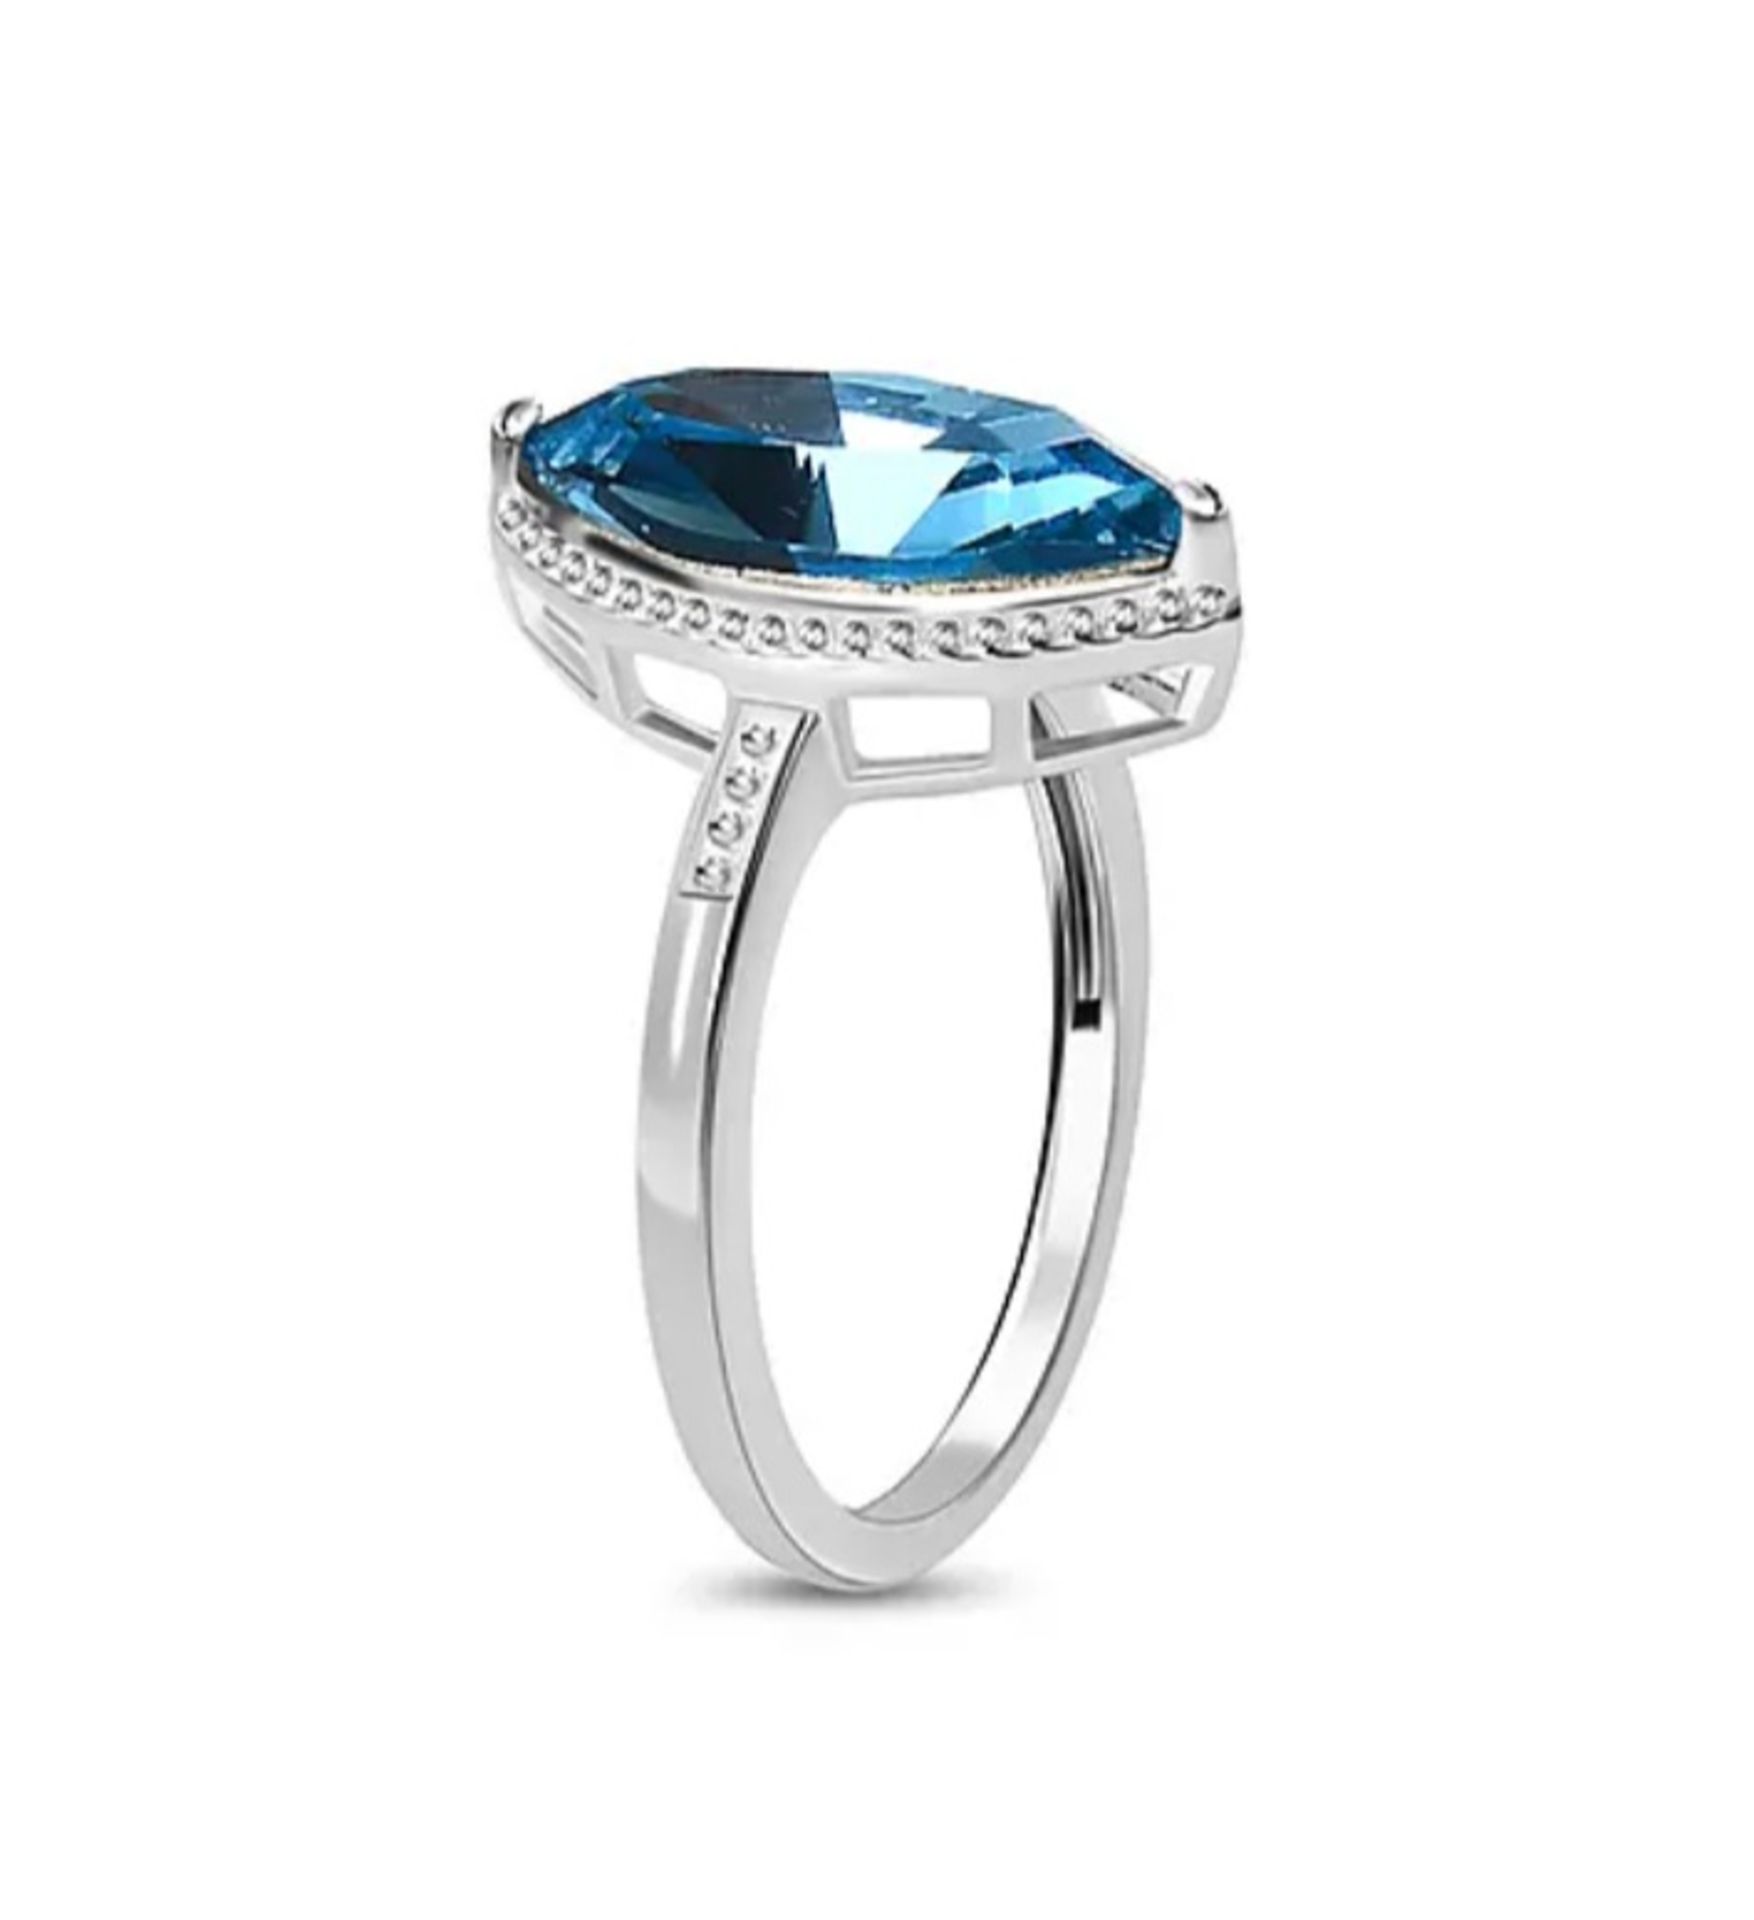 NEW! Aquamarine Austrian Crystal Solitaire Ring - Image 4 of 5